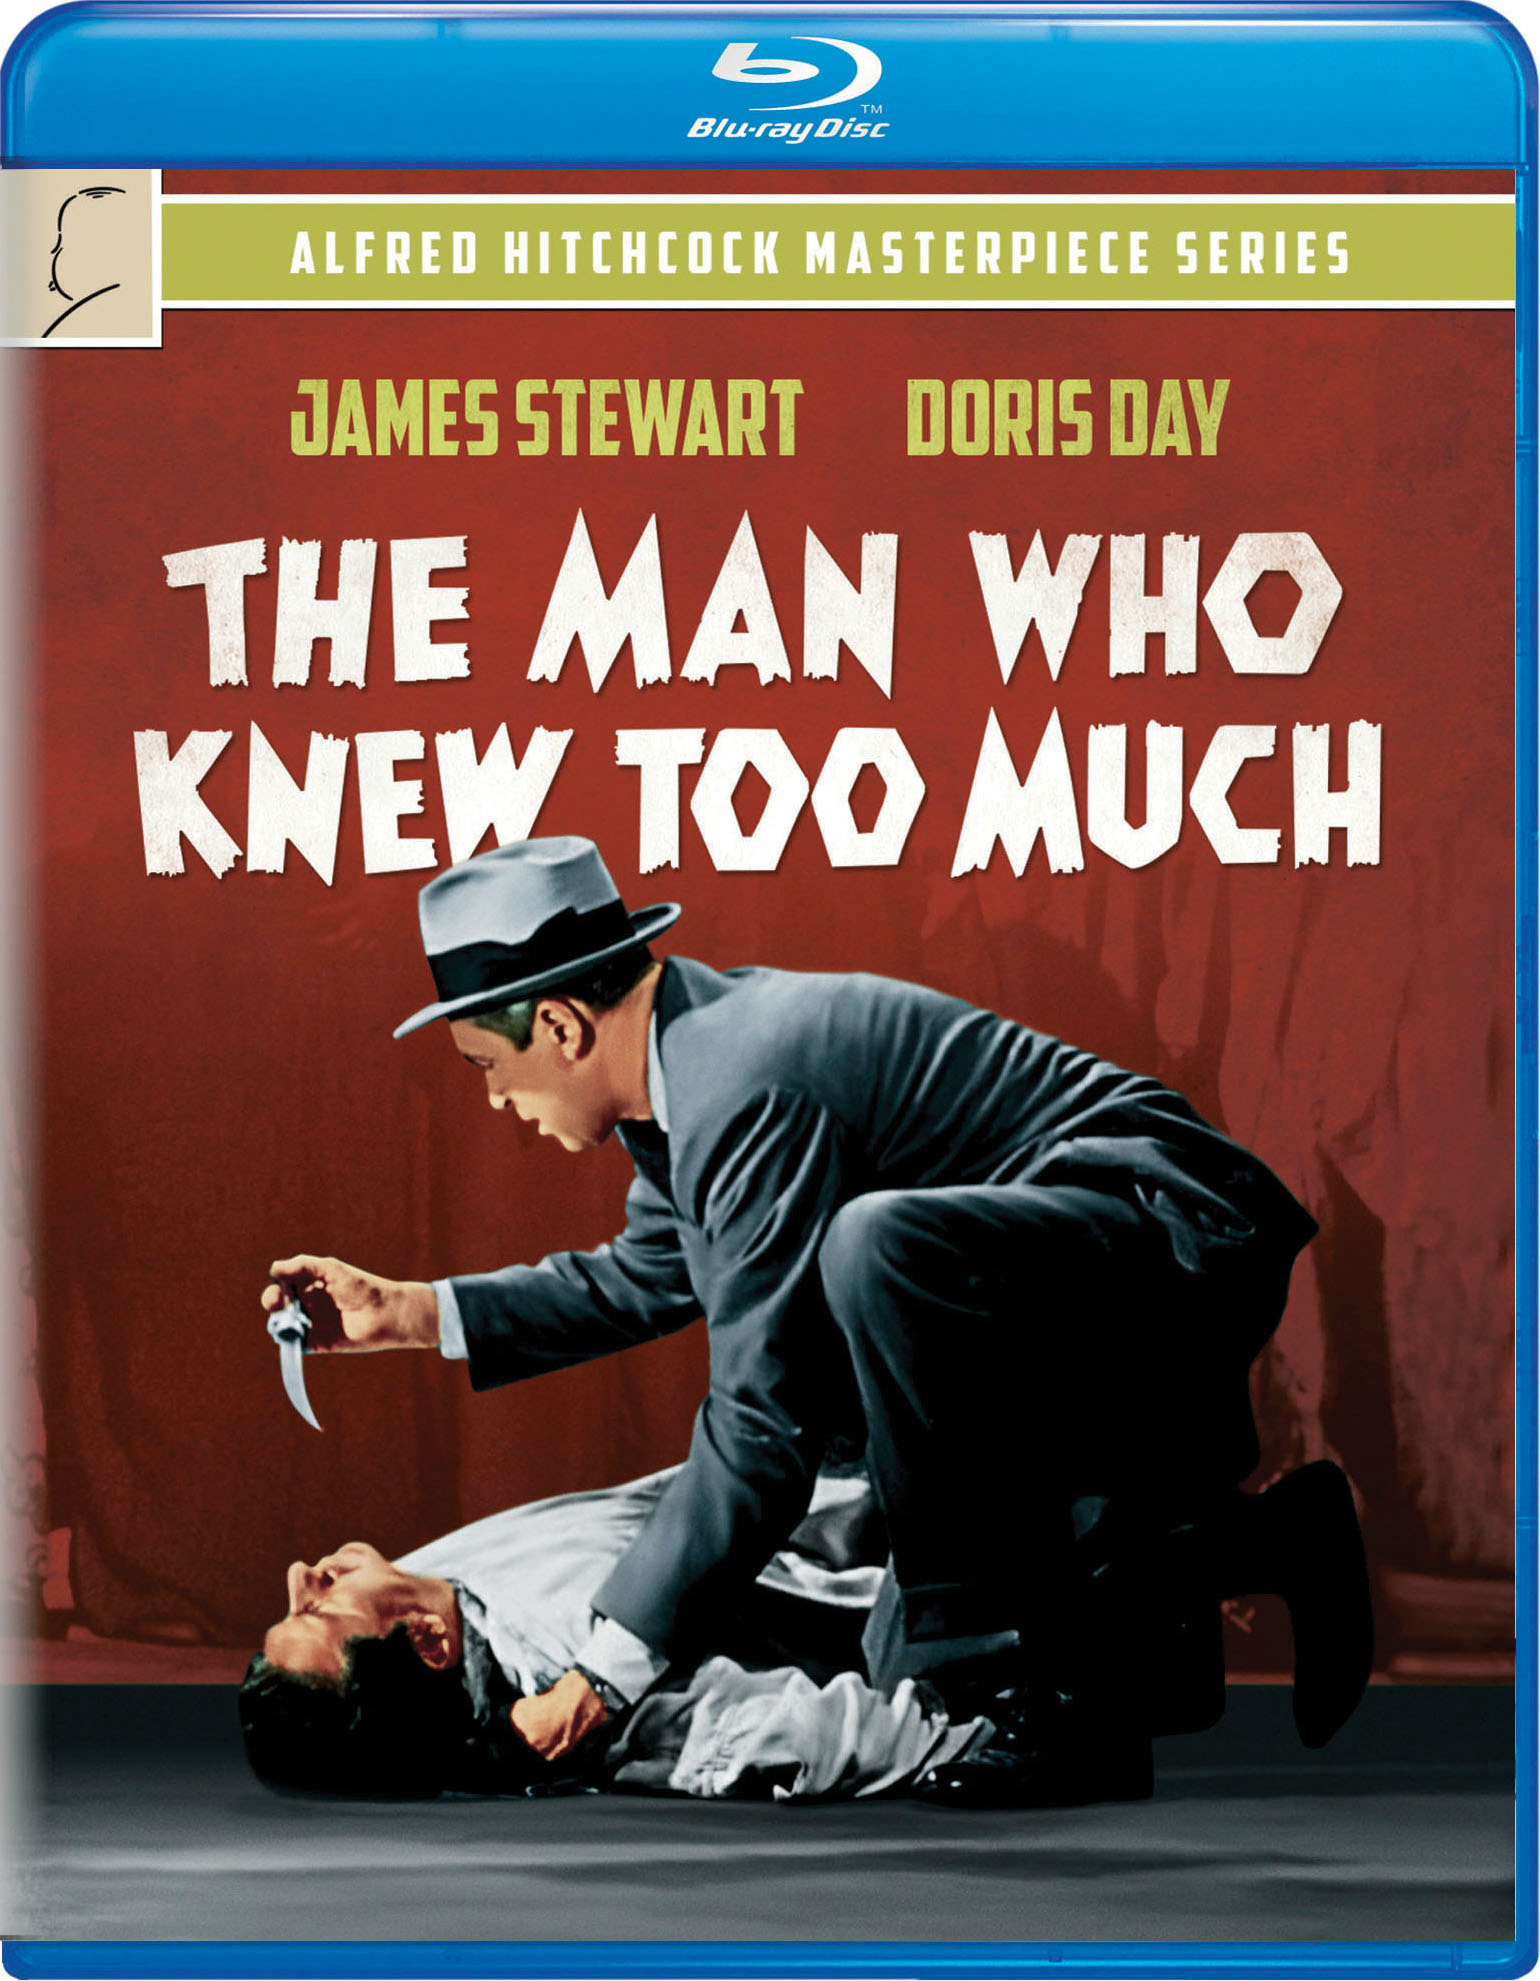 The Man Who Knew Too Much - Blu-ray [ 1956 ]  - Modern Classic Movies On Blu-ray - Movies On GRUV